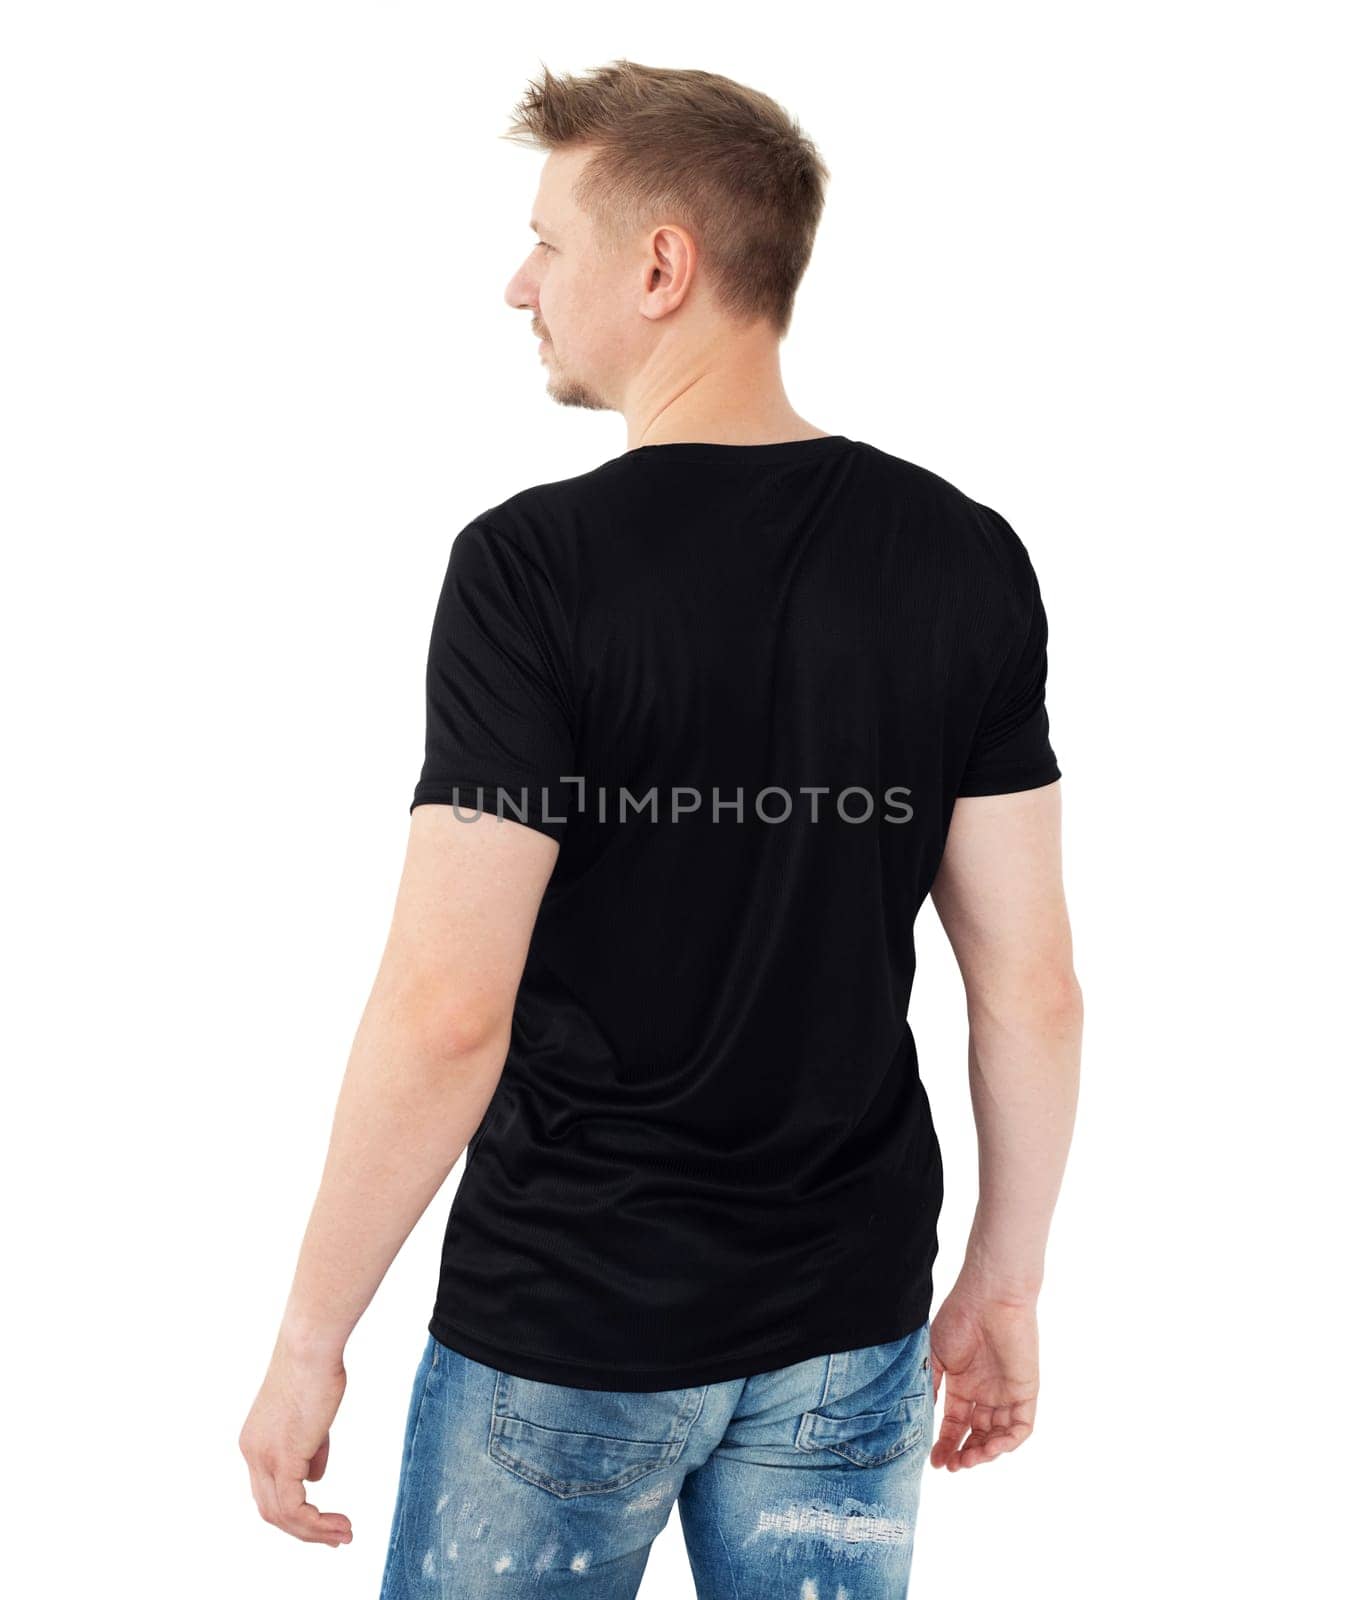 Attractive young man in a black T-shirt by GekaSkr